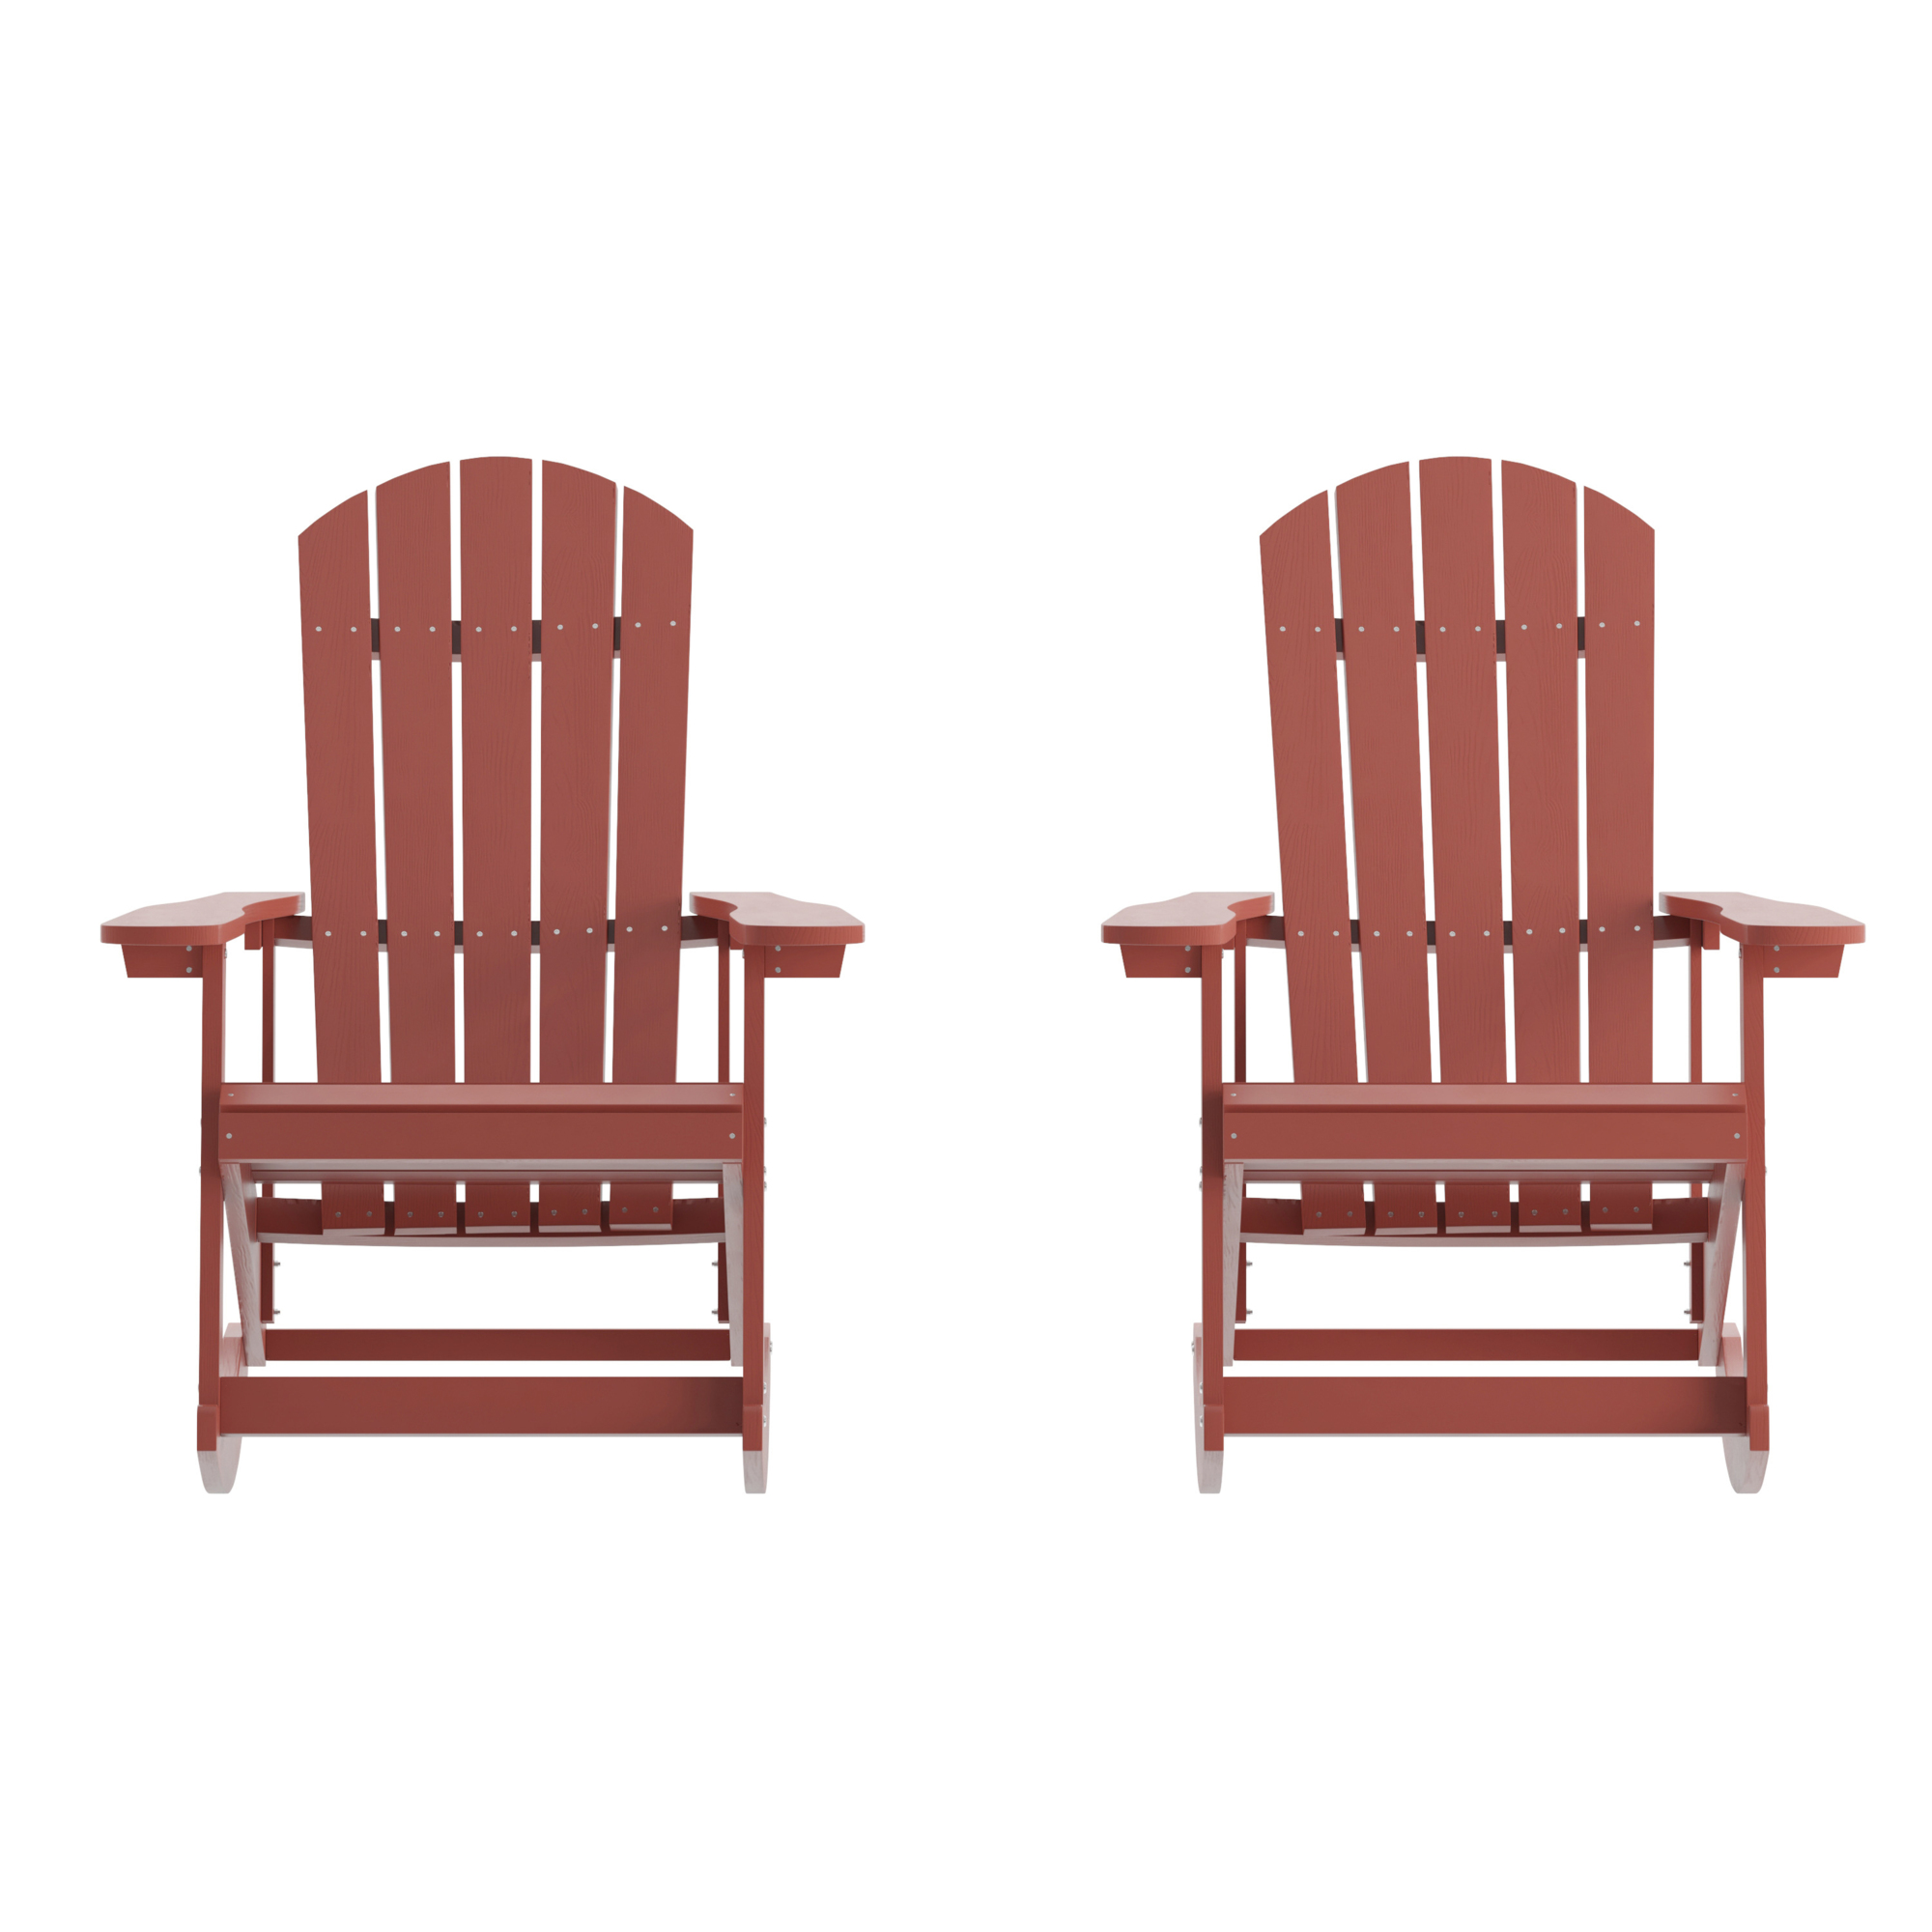 Flash Furniture, 2 PK White Poly Resin Adirondack Rocking Chairs, Primary Color Red, Material Polystyrene, Width 29.5 in, Model JJC14705RED2